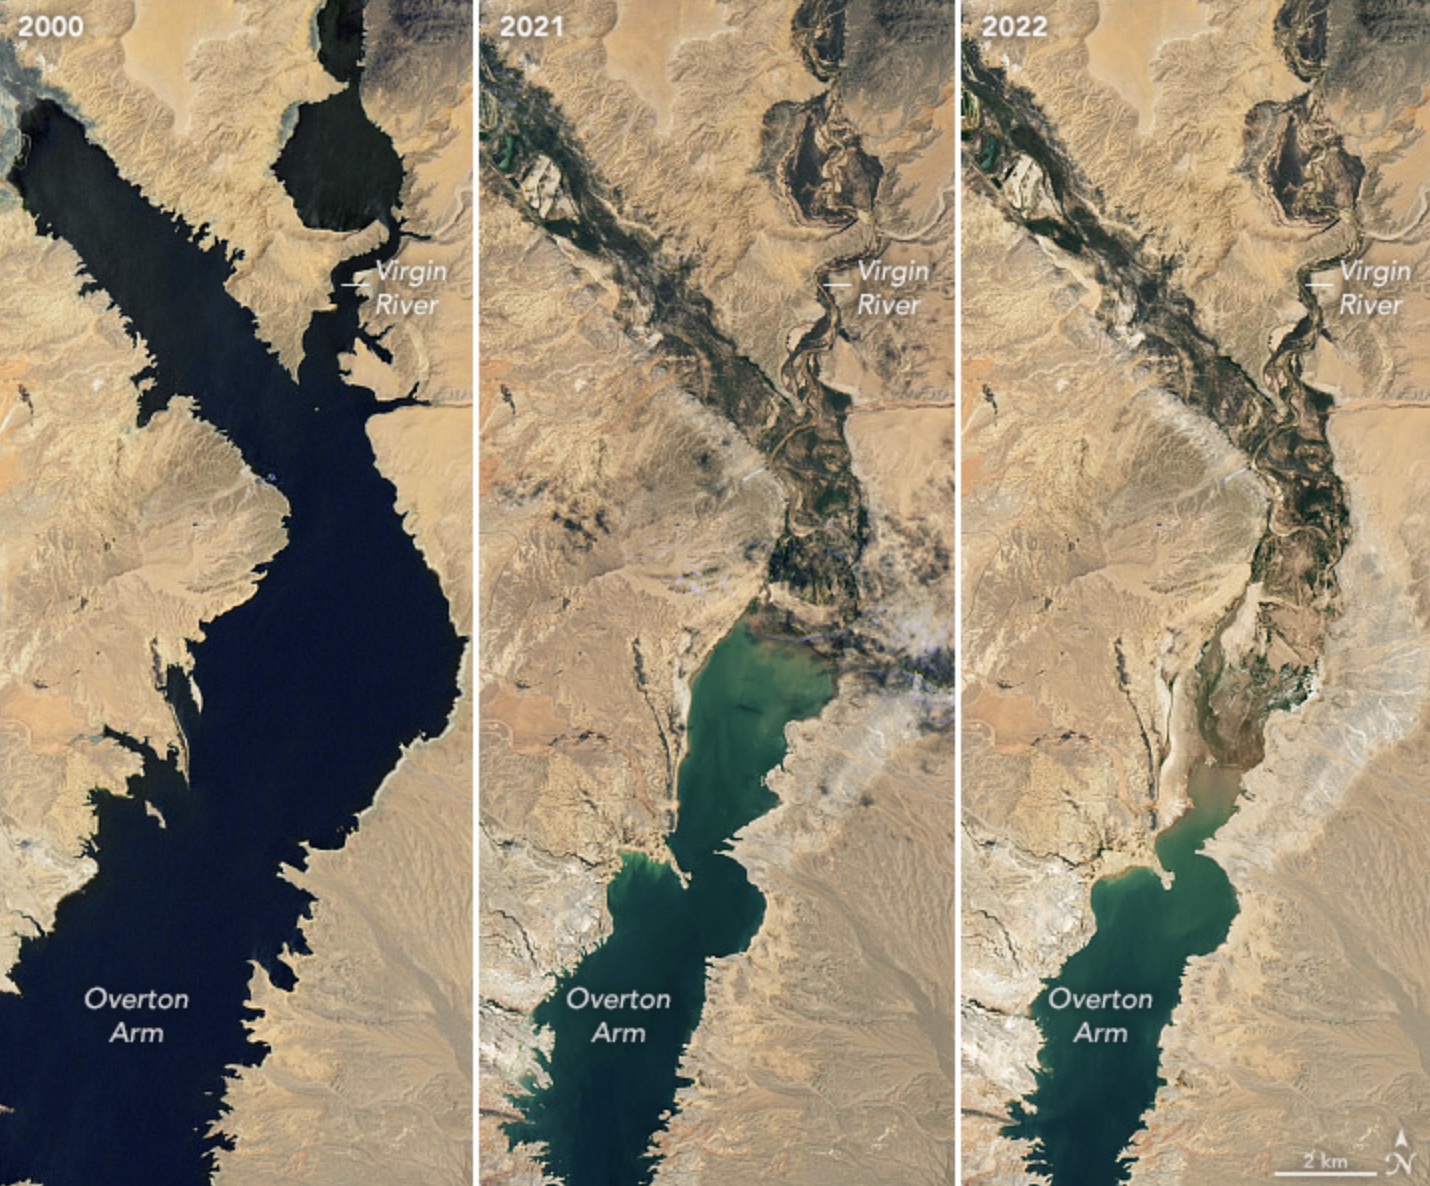 Lake Mead water loss over the last 22 years